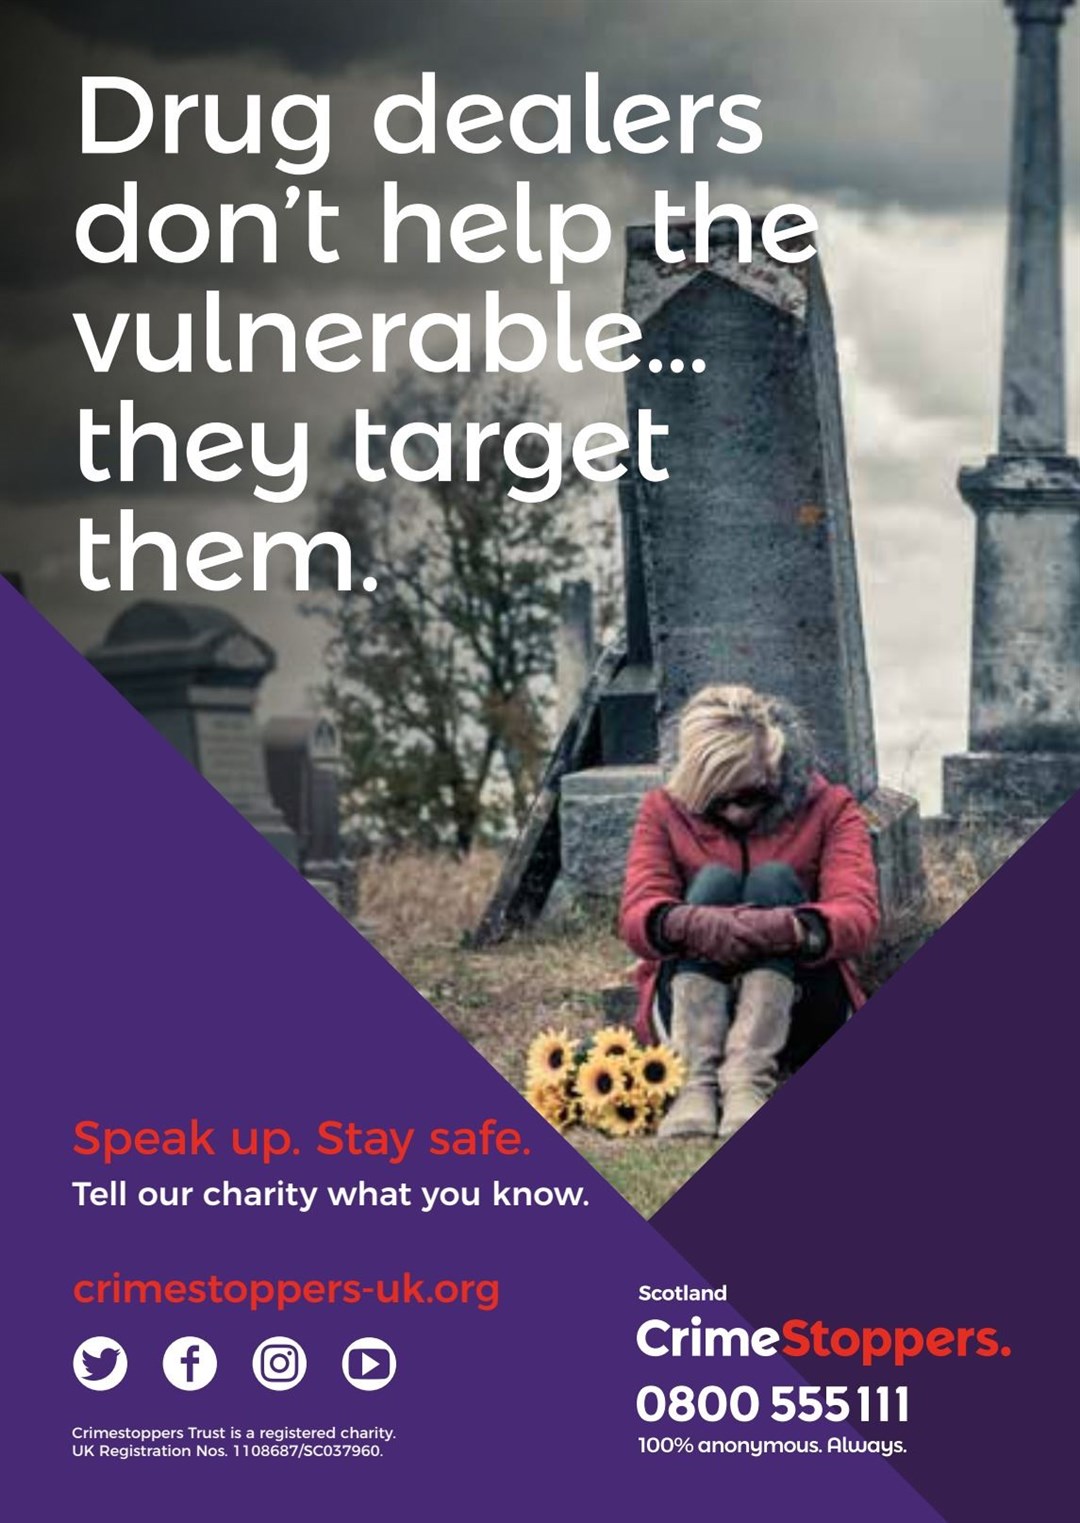 Charity Crimestoppers launches a new campaign highlighting the impact drug dealers can have on the lives of Scotland's most vulnerable.